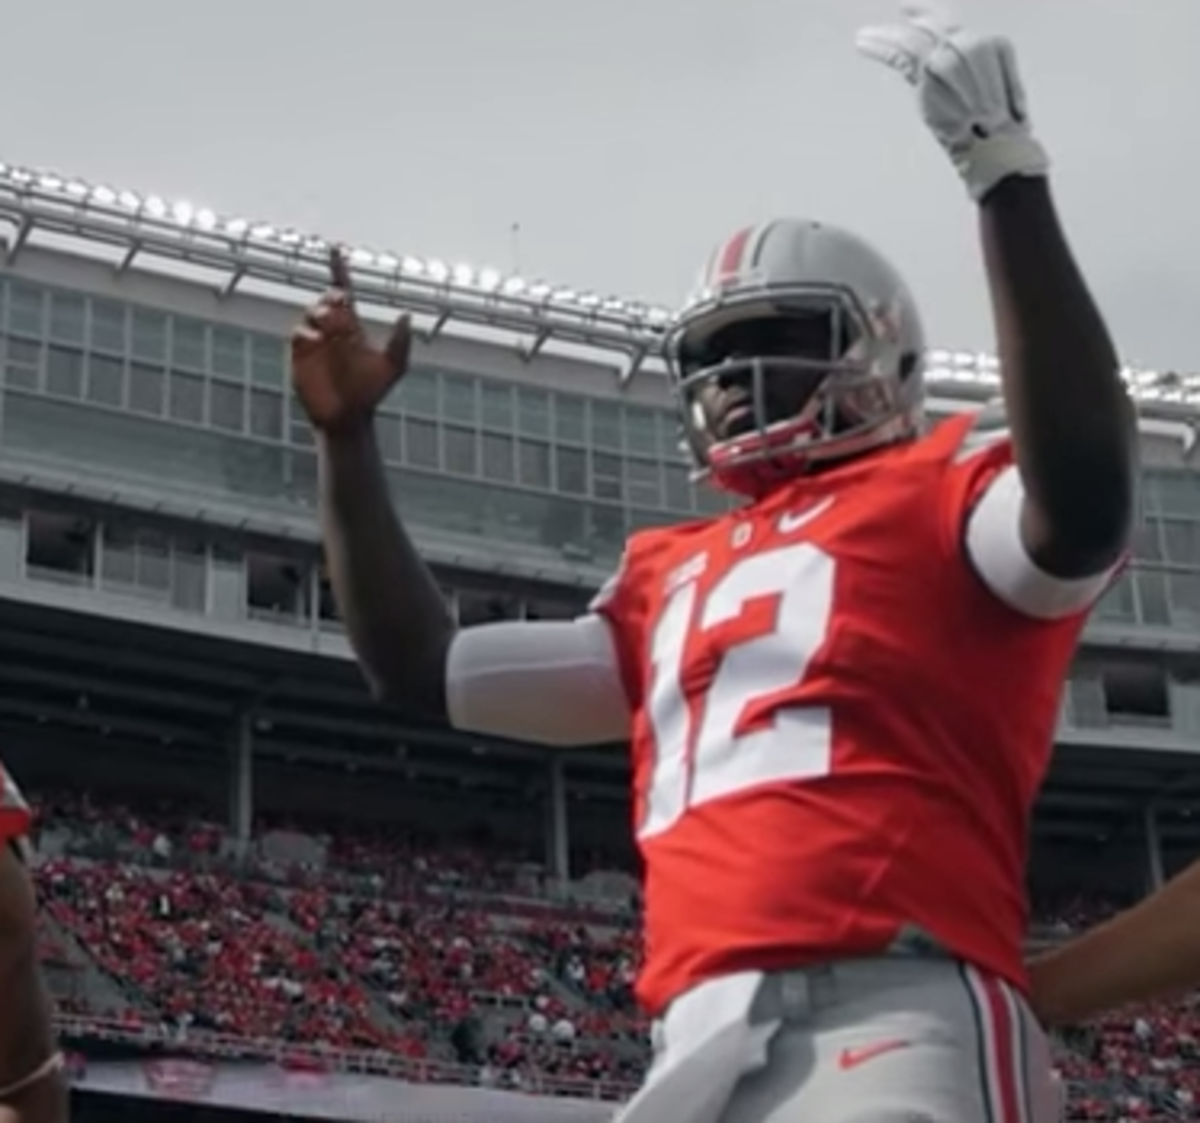 Cardale Jones pumping up the crowd before the game.